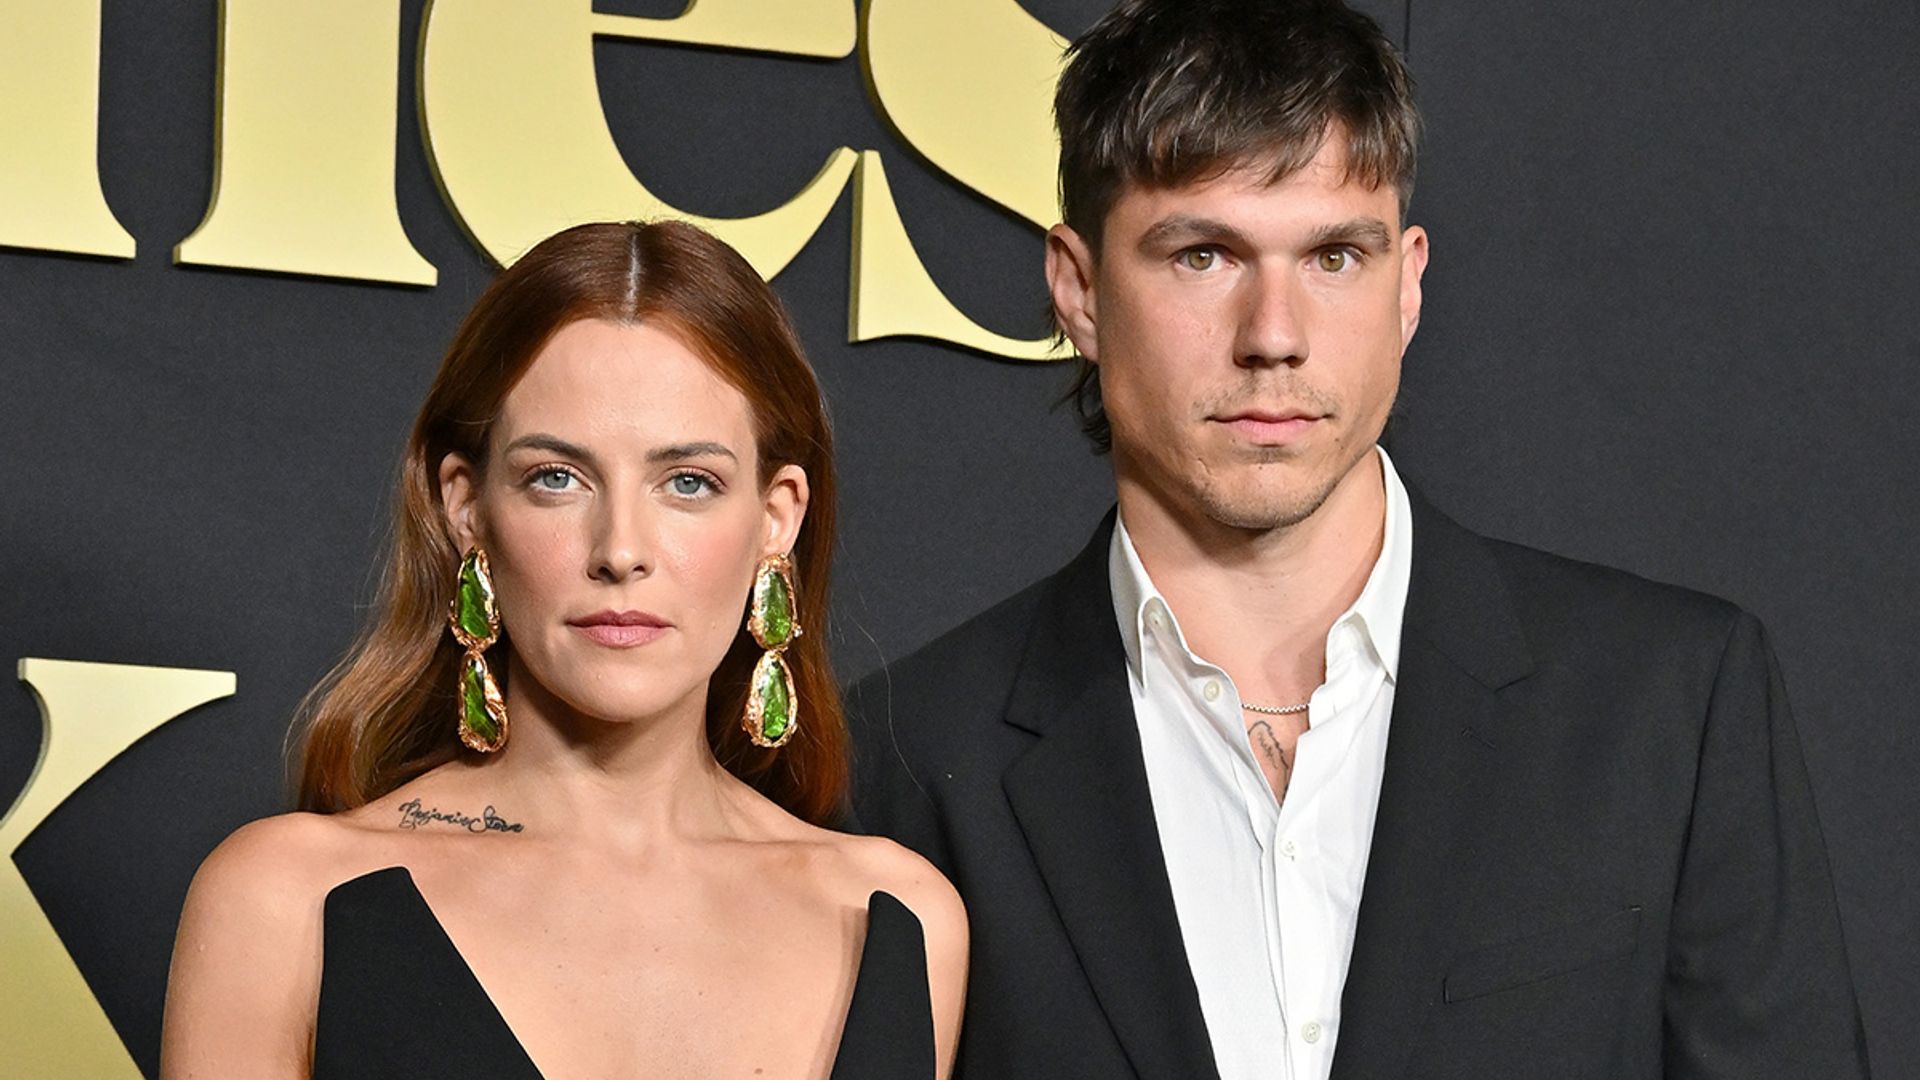 Riley Keough And Ben Smith-Petersen's Relationship, In Their Own Words